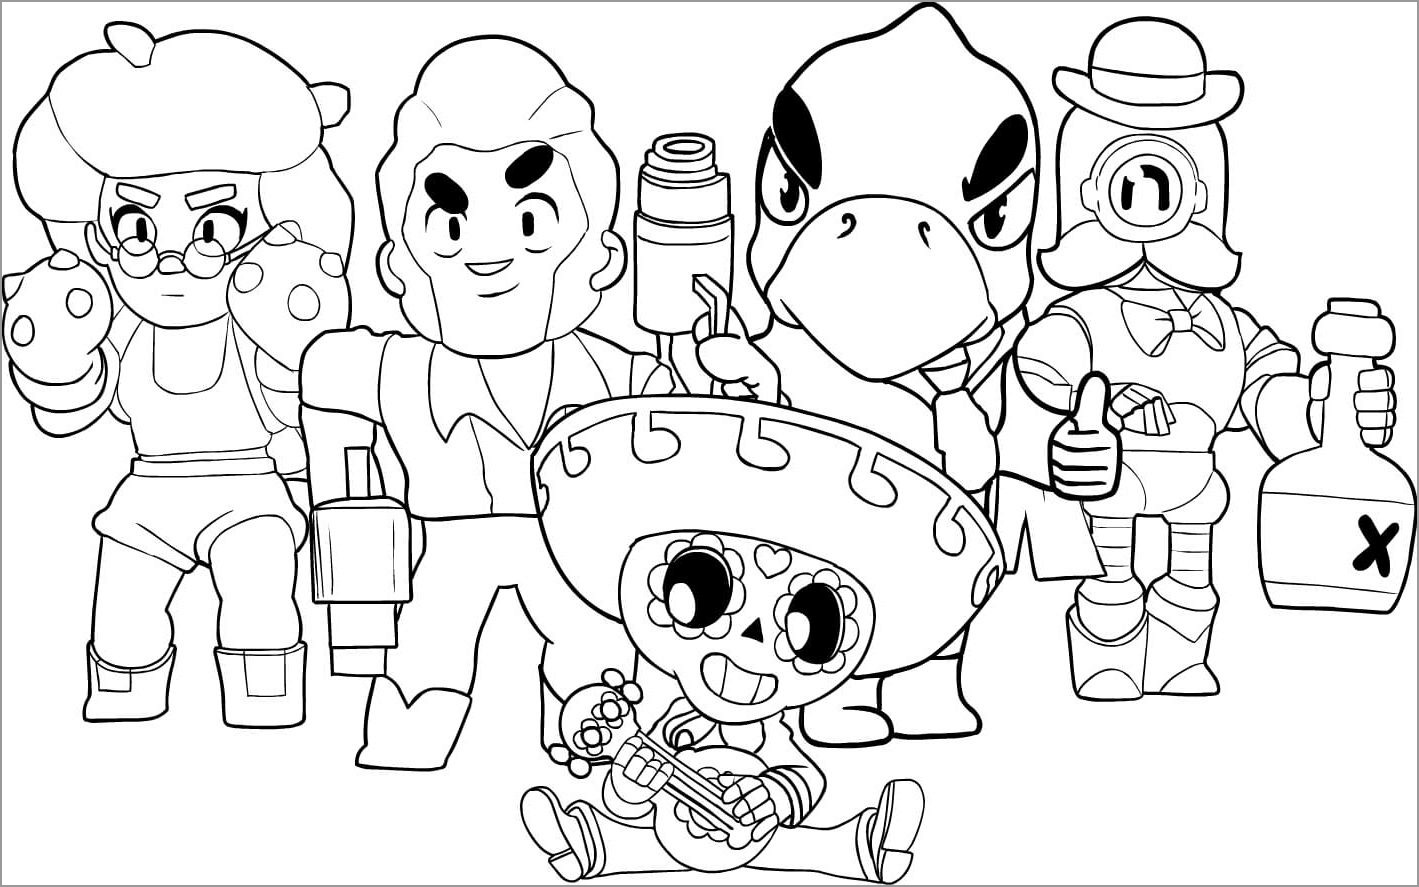 Brawl Stars Coloring Pages All Brawlers Coloringbay - bull brawl stars coloring pages